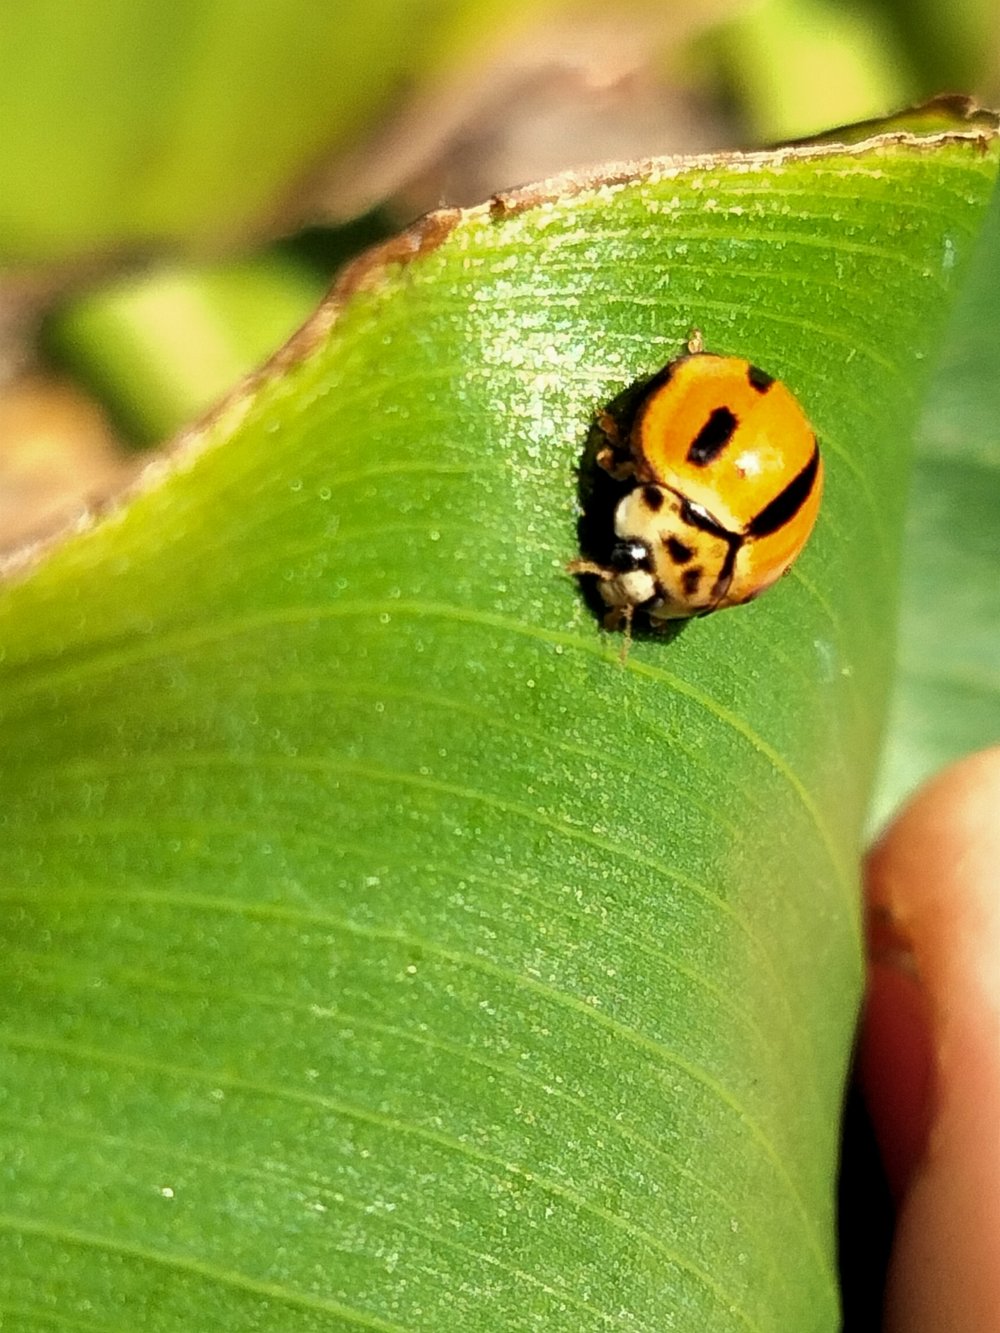    Coelophora inaequalis   (Variable Ladybug) with the variation that could be confused with a   Micraspis frenata   (Striped Ladybird) 